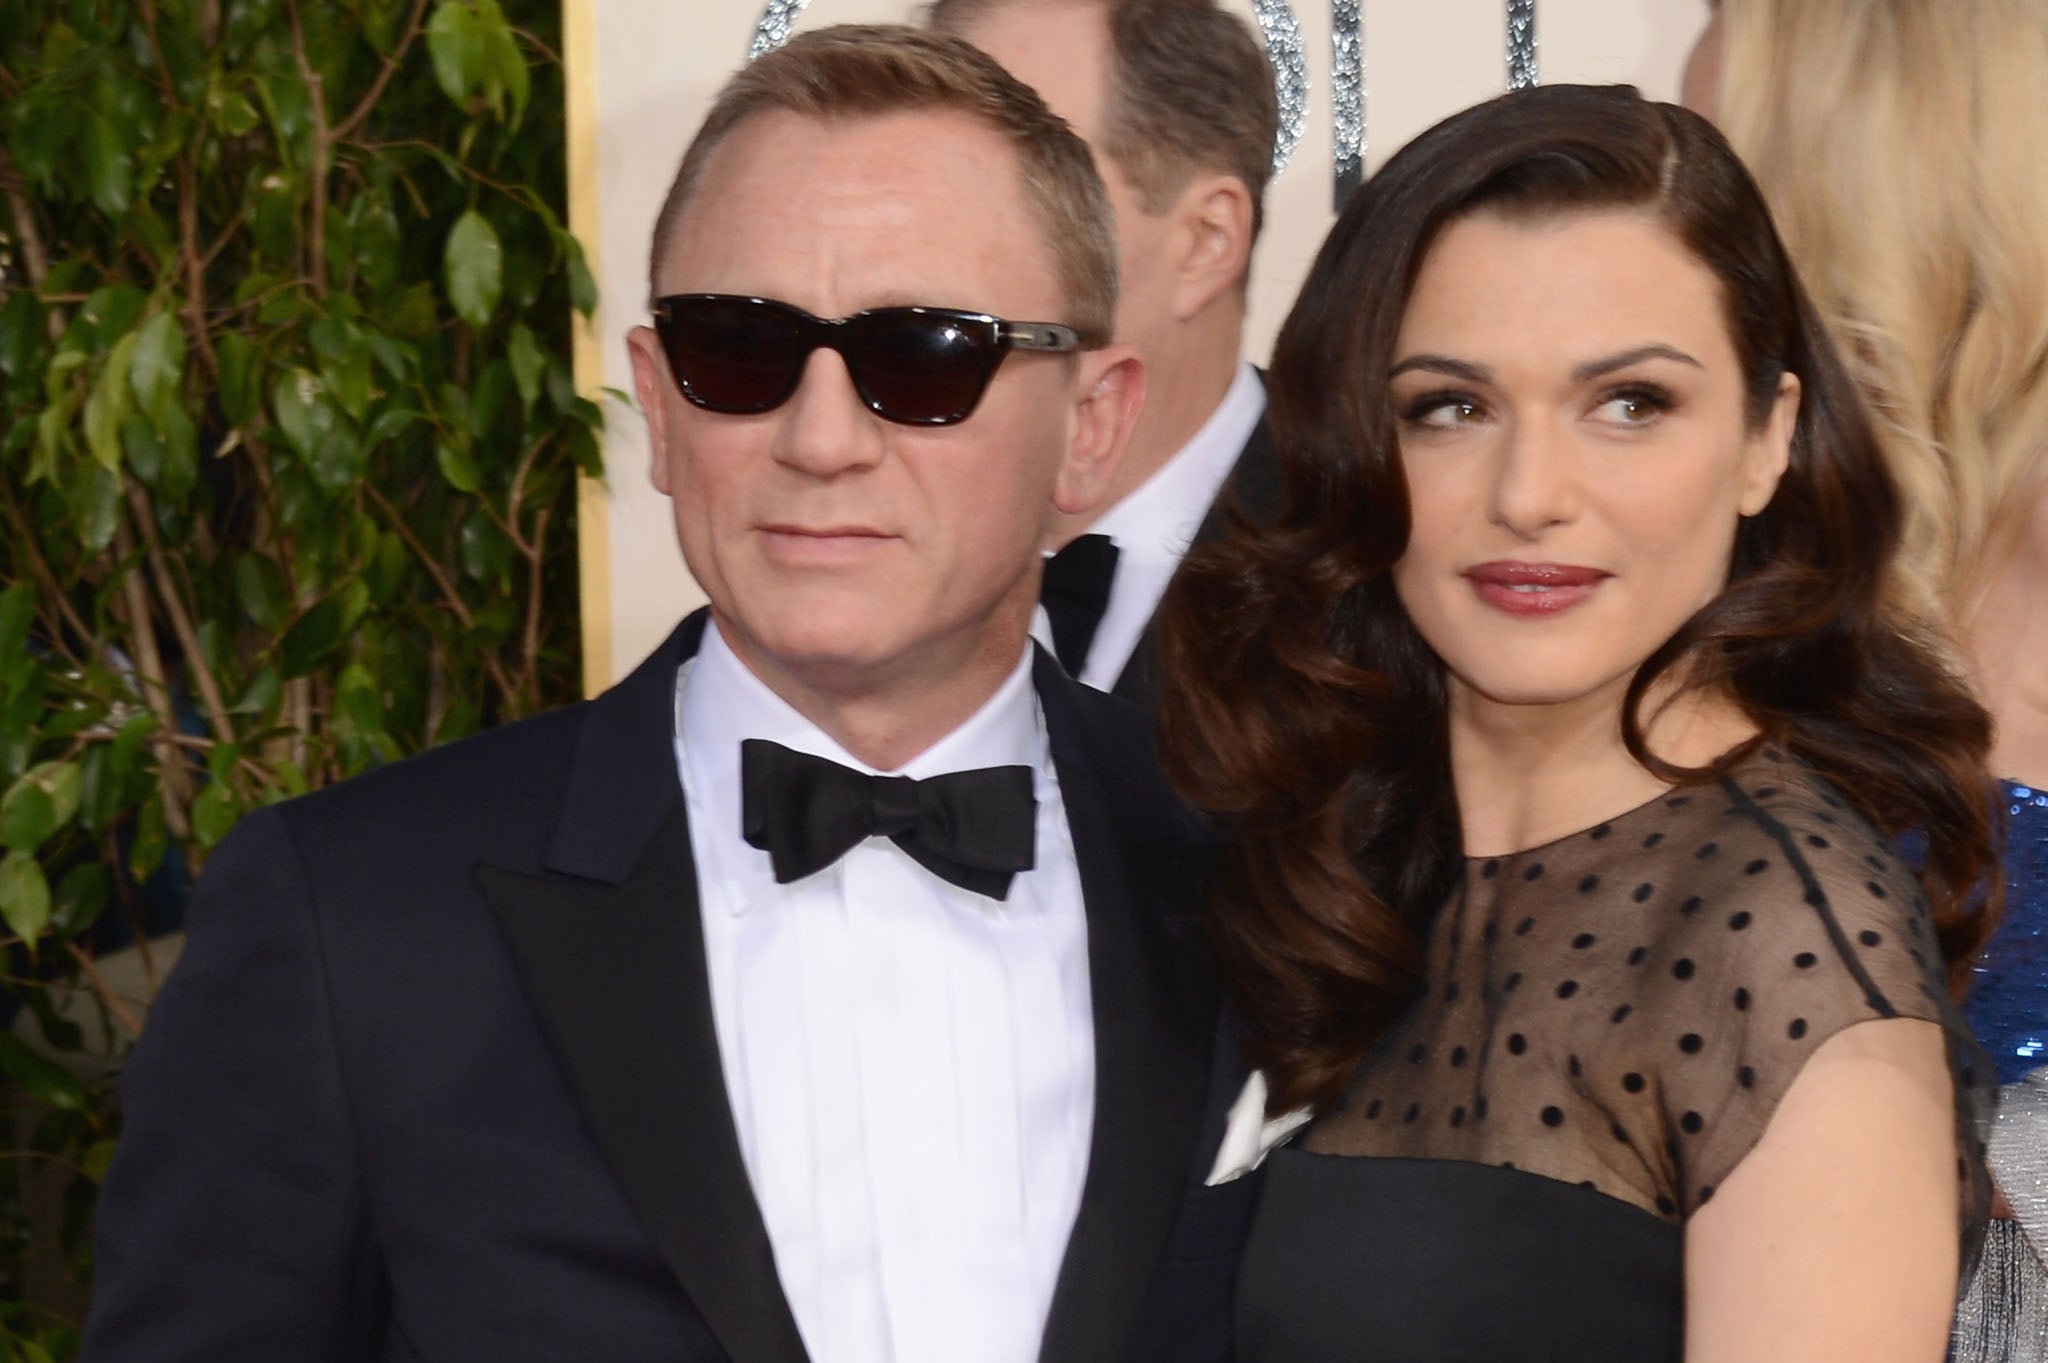 Real-life couple Daniel Craig and Rachel Weisz will appear together on stage in Betrayal by Harold Pinter